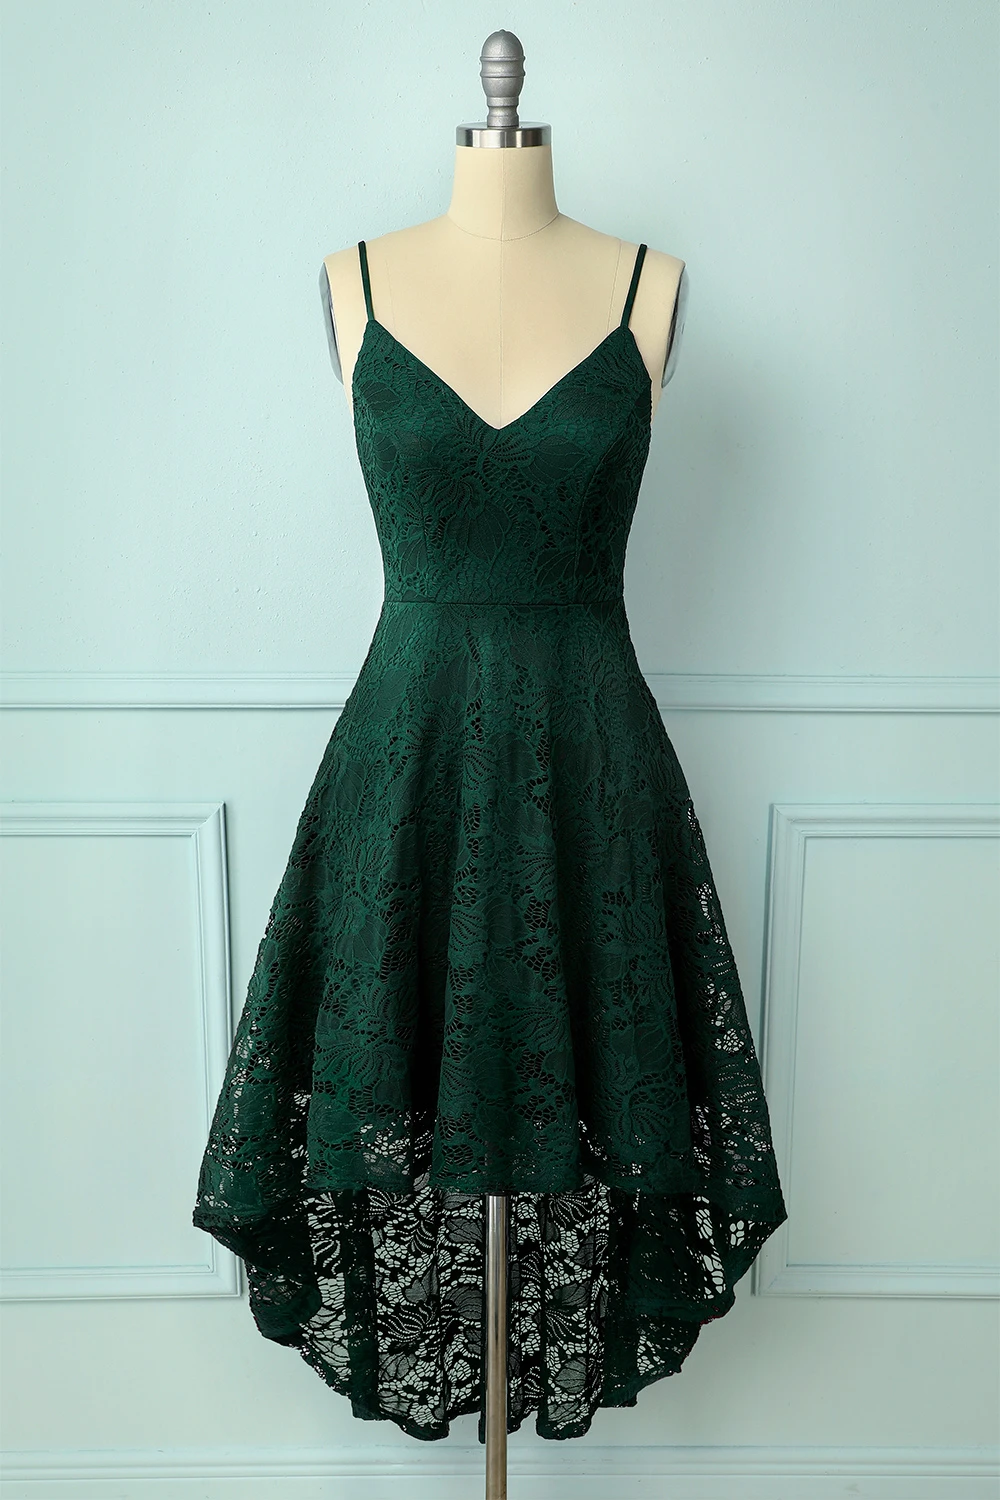 How to Wear Green Lace Dress: 15 Deep & Beautiful Outfits